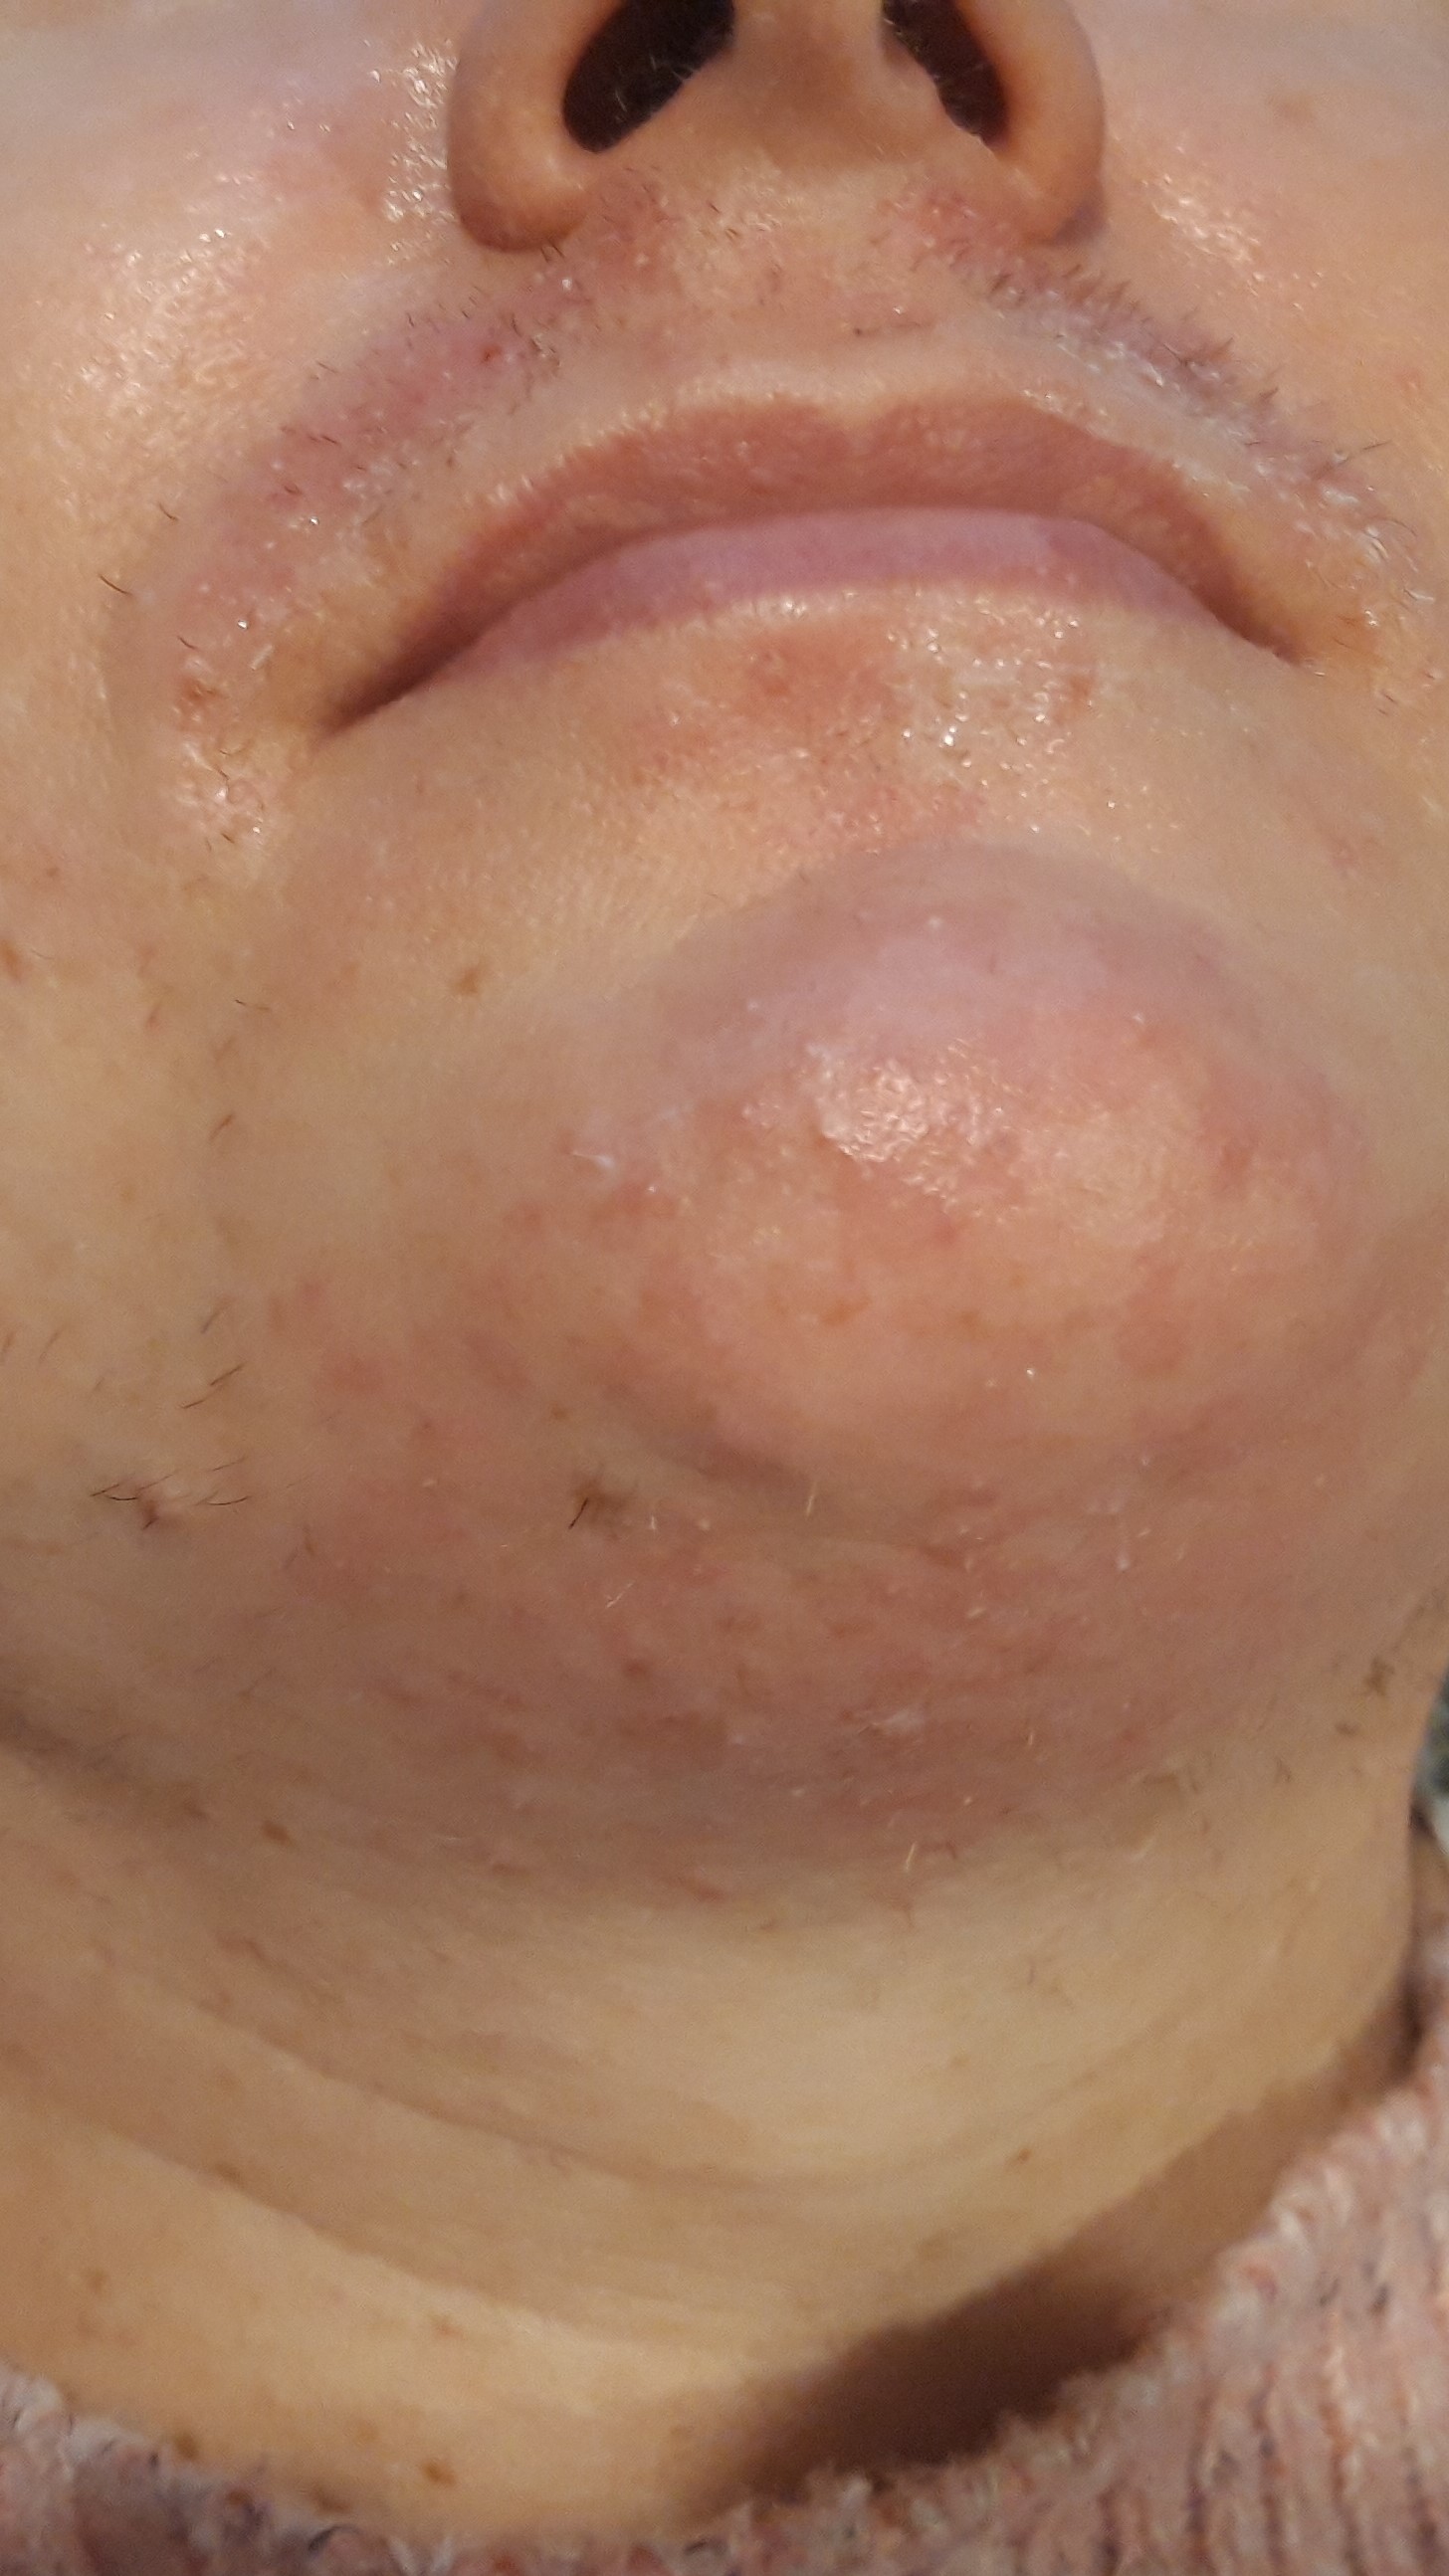 Image of Electrolysis Hair Removal on the Upper Lip, Chin and Neck